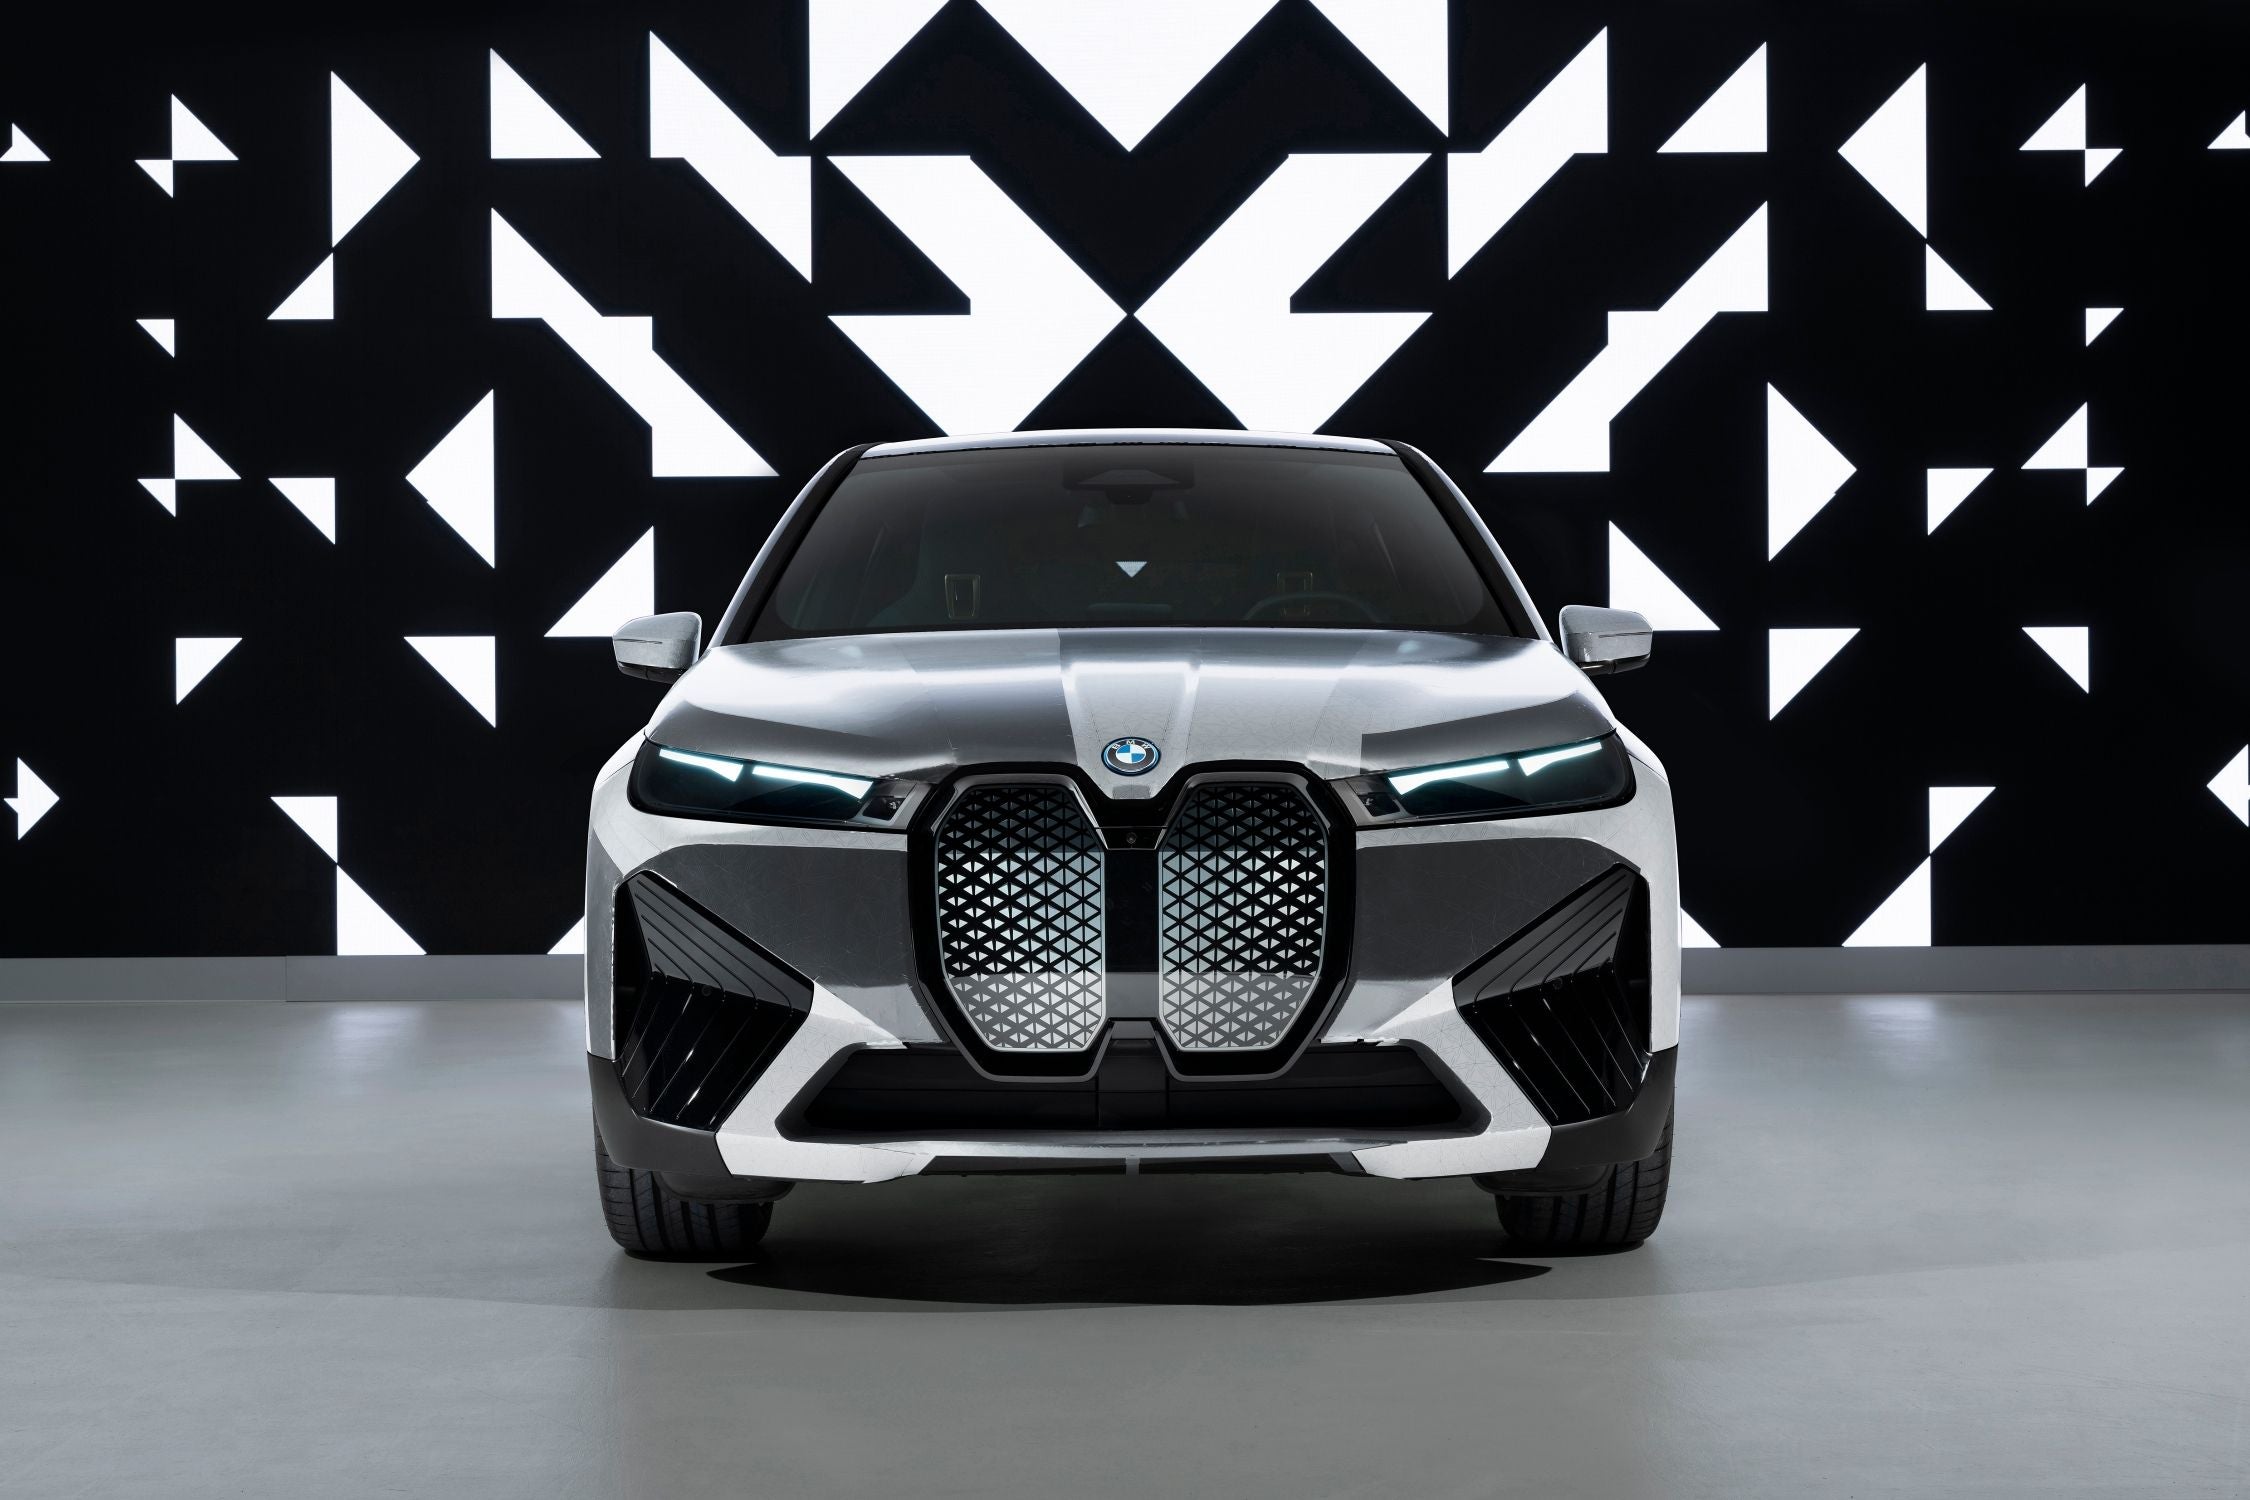 The concept car uses E Ink technology to enable it to change between black and white. (BMW)